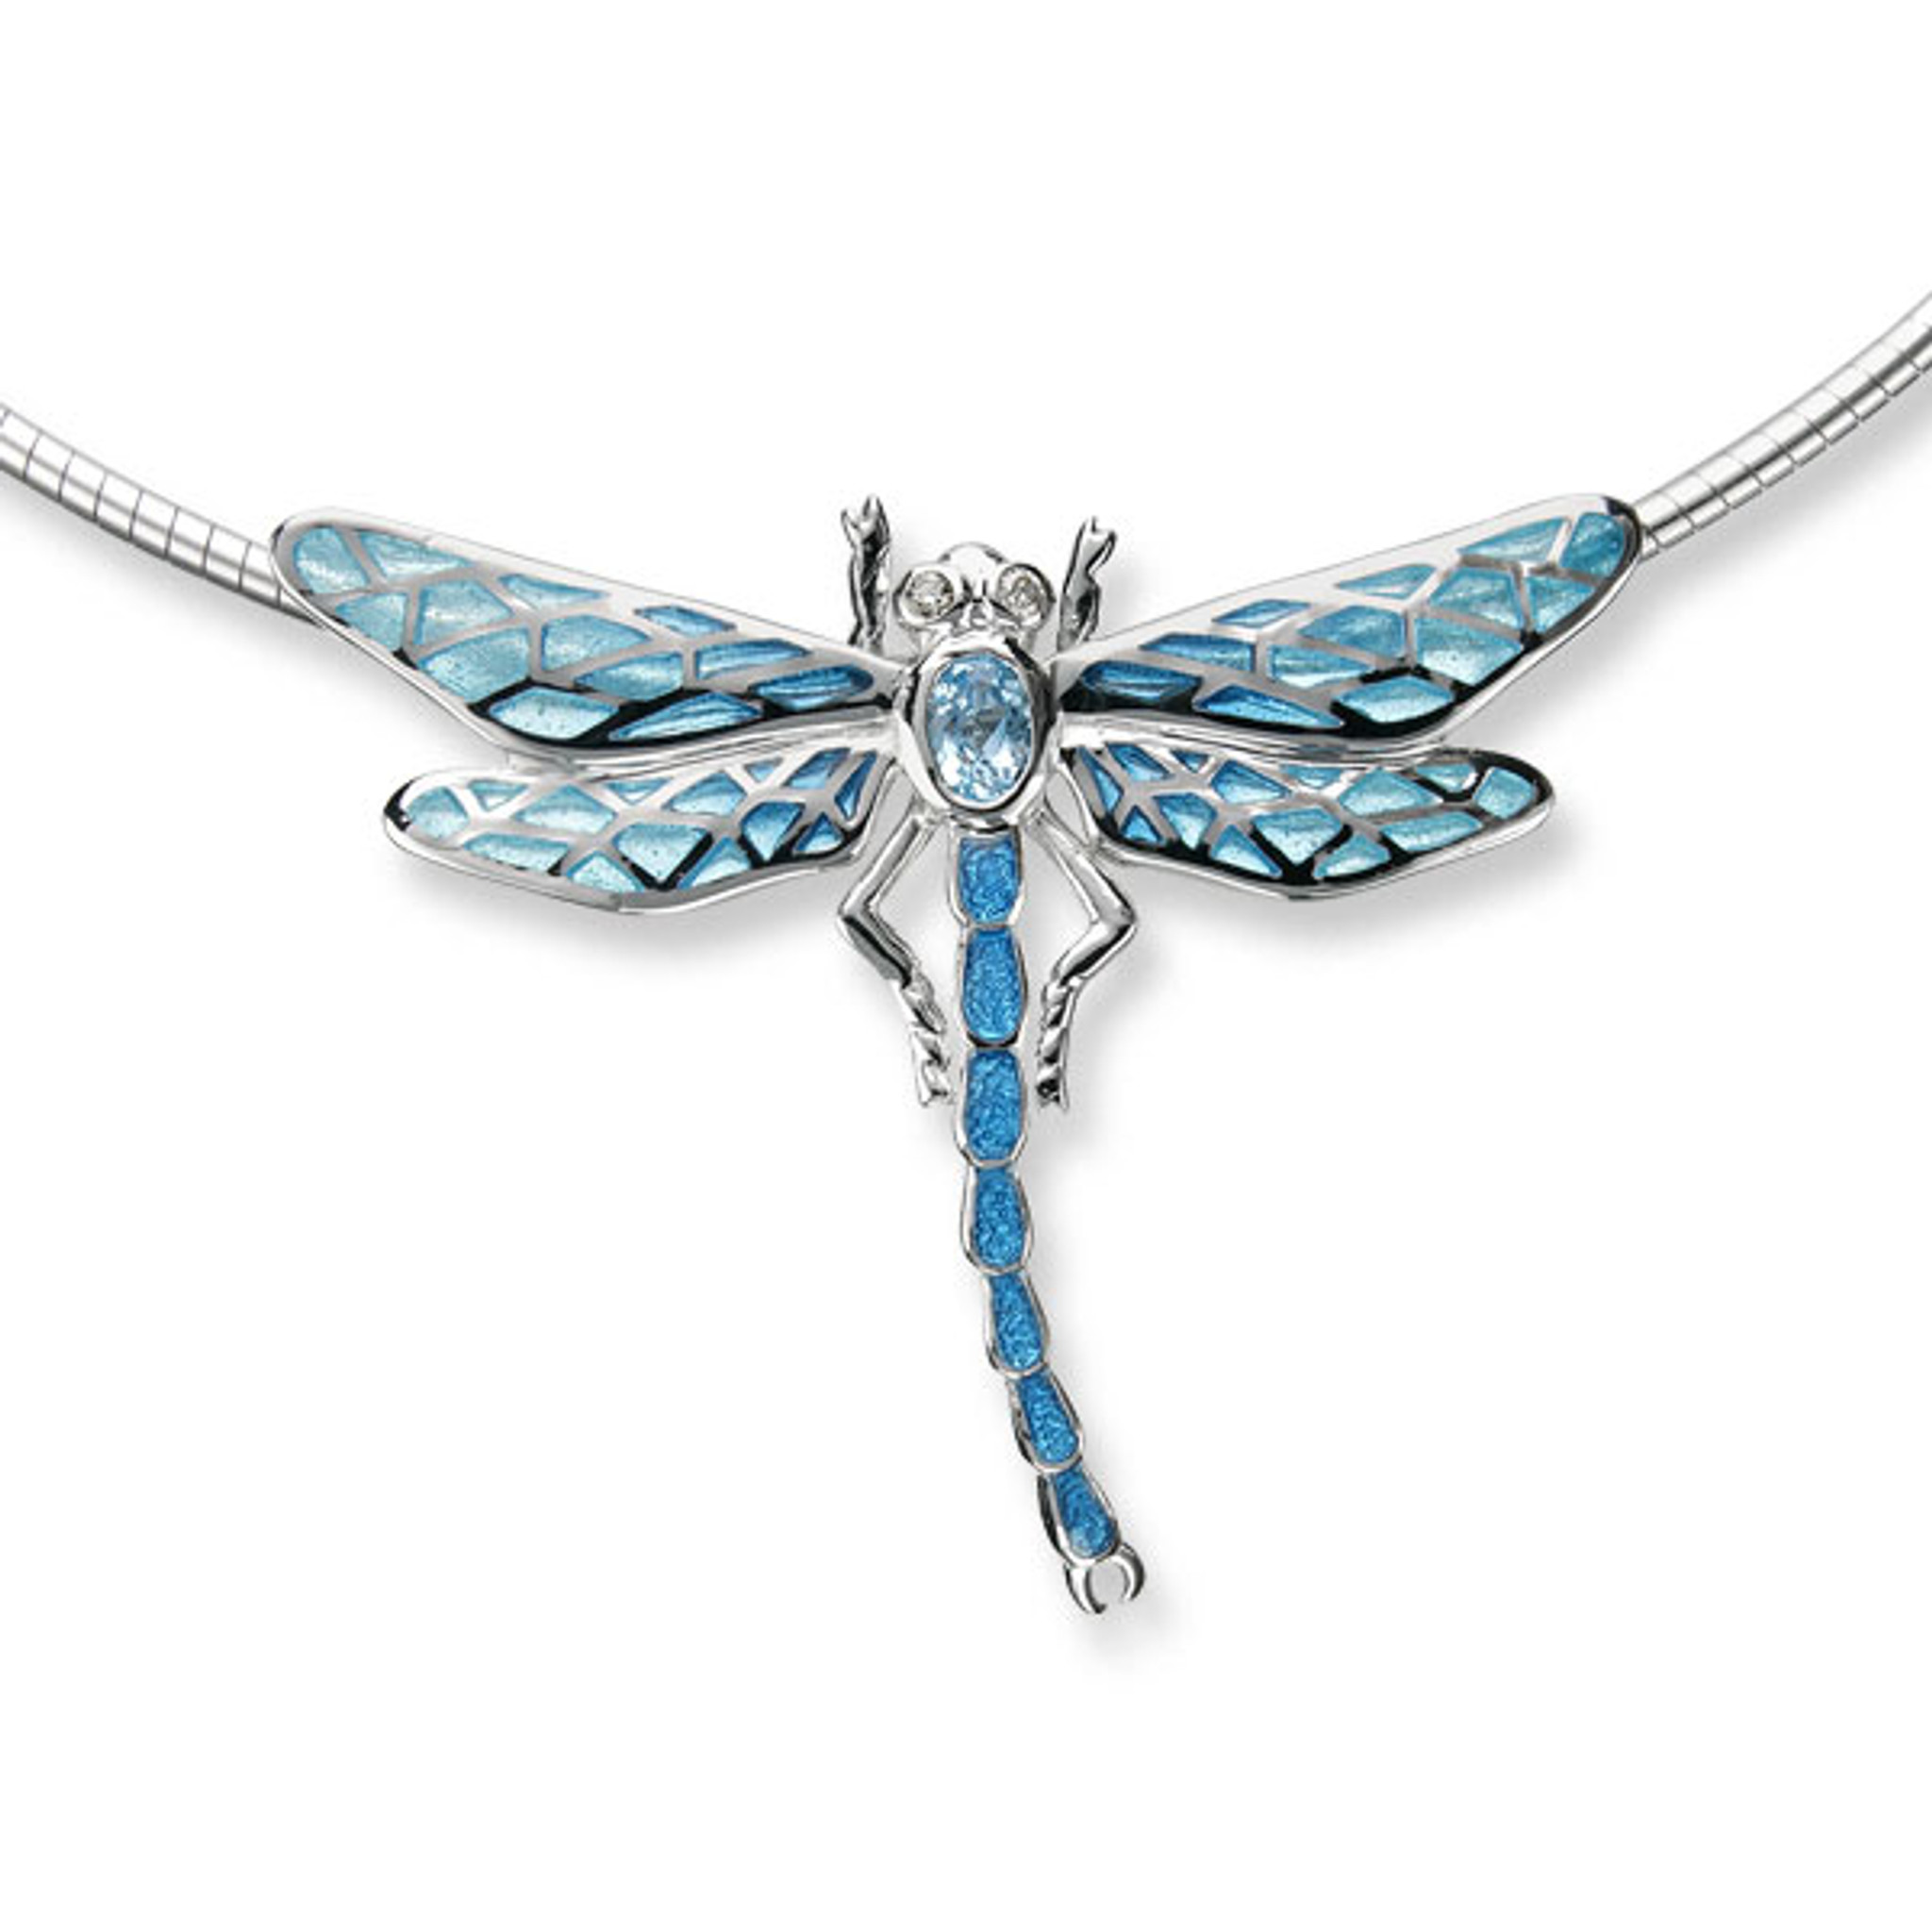 Buy Vintage Dragonfly Pendant Necklace/costume Chain Necklace/blue and  Silver Colour/blue Rhinestone/birthday Gift/valentine Gift/dragonfly Online  in India - Etsy